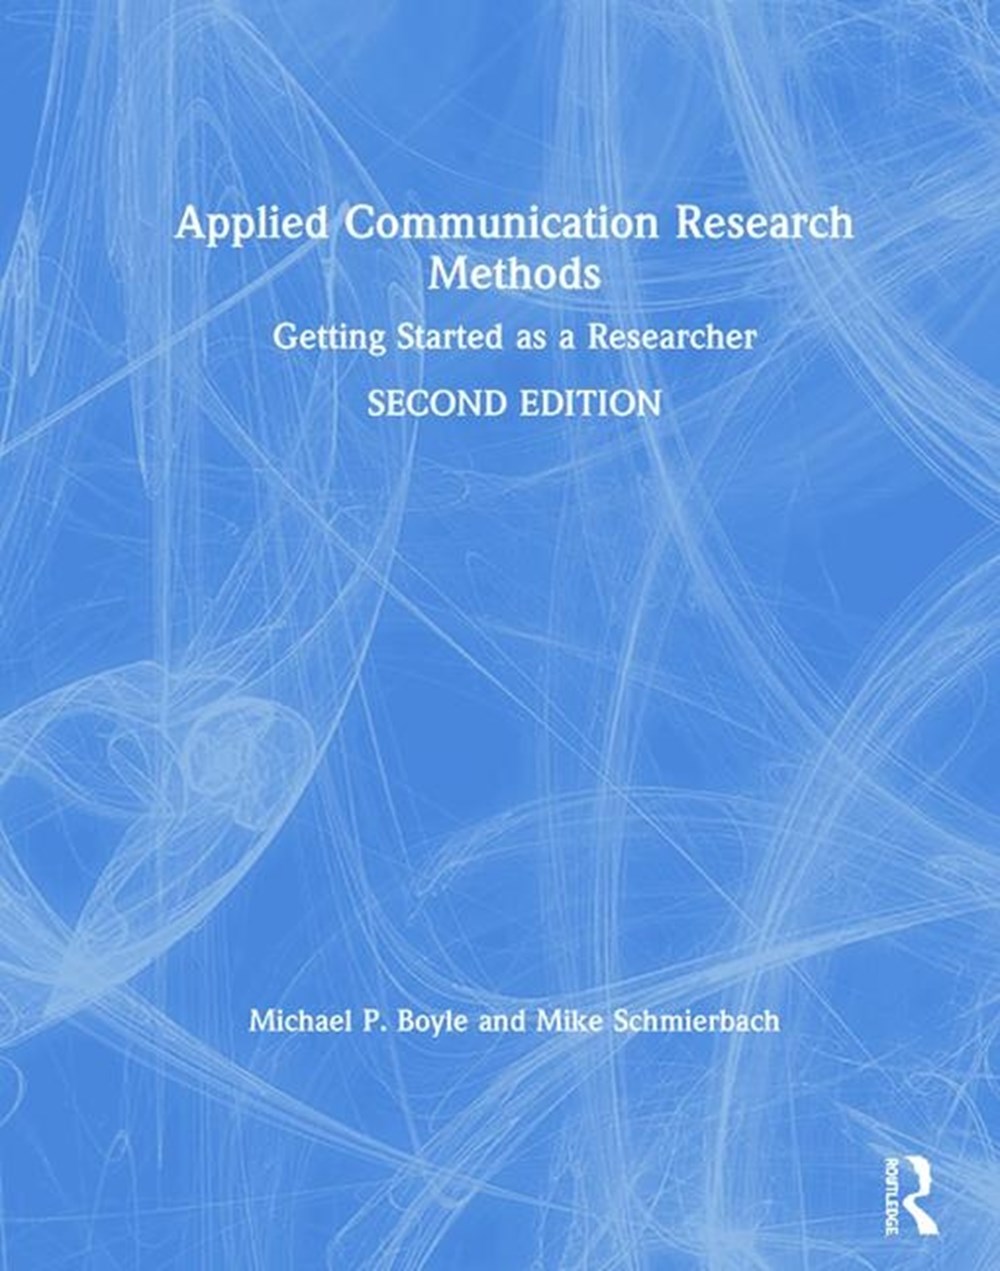 communication research techniques methods and applications pdf